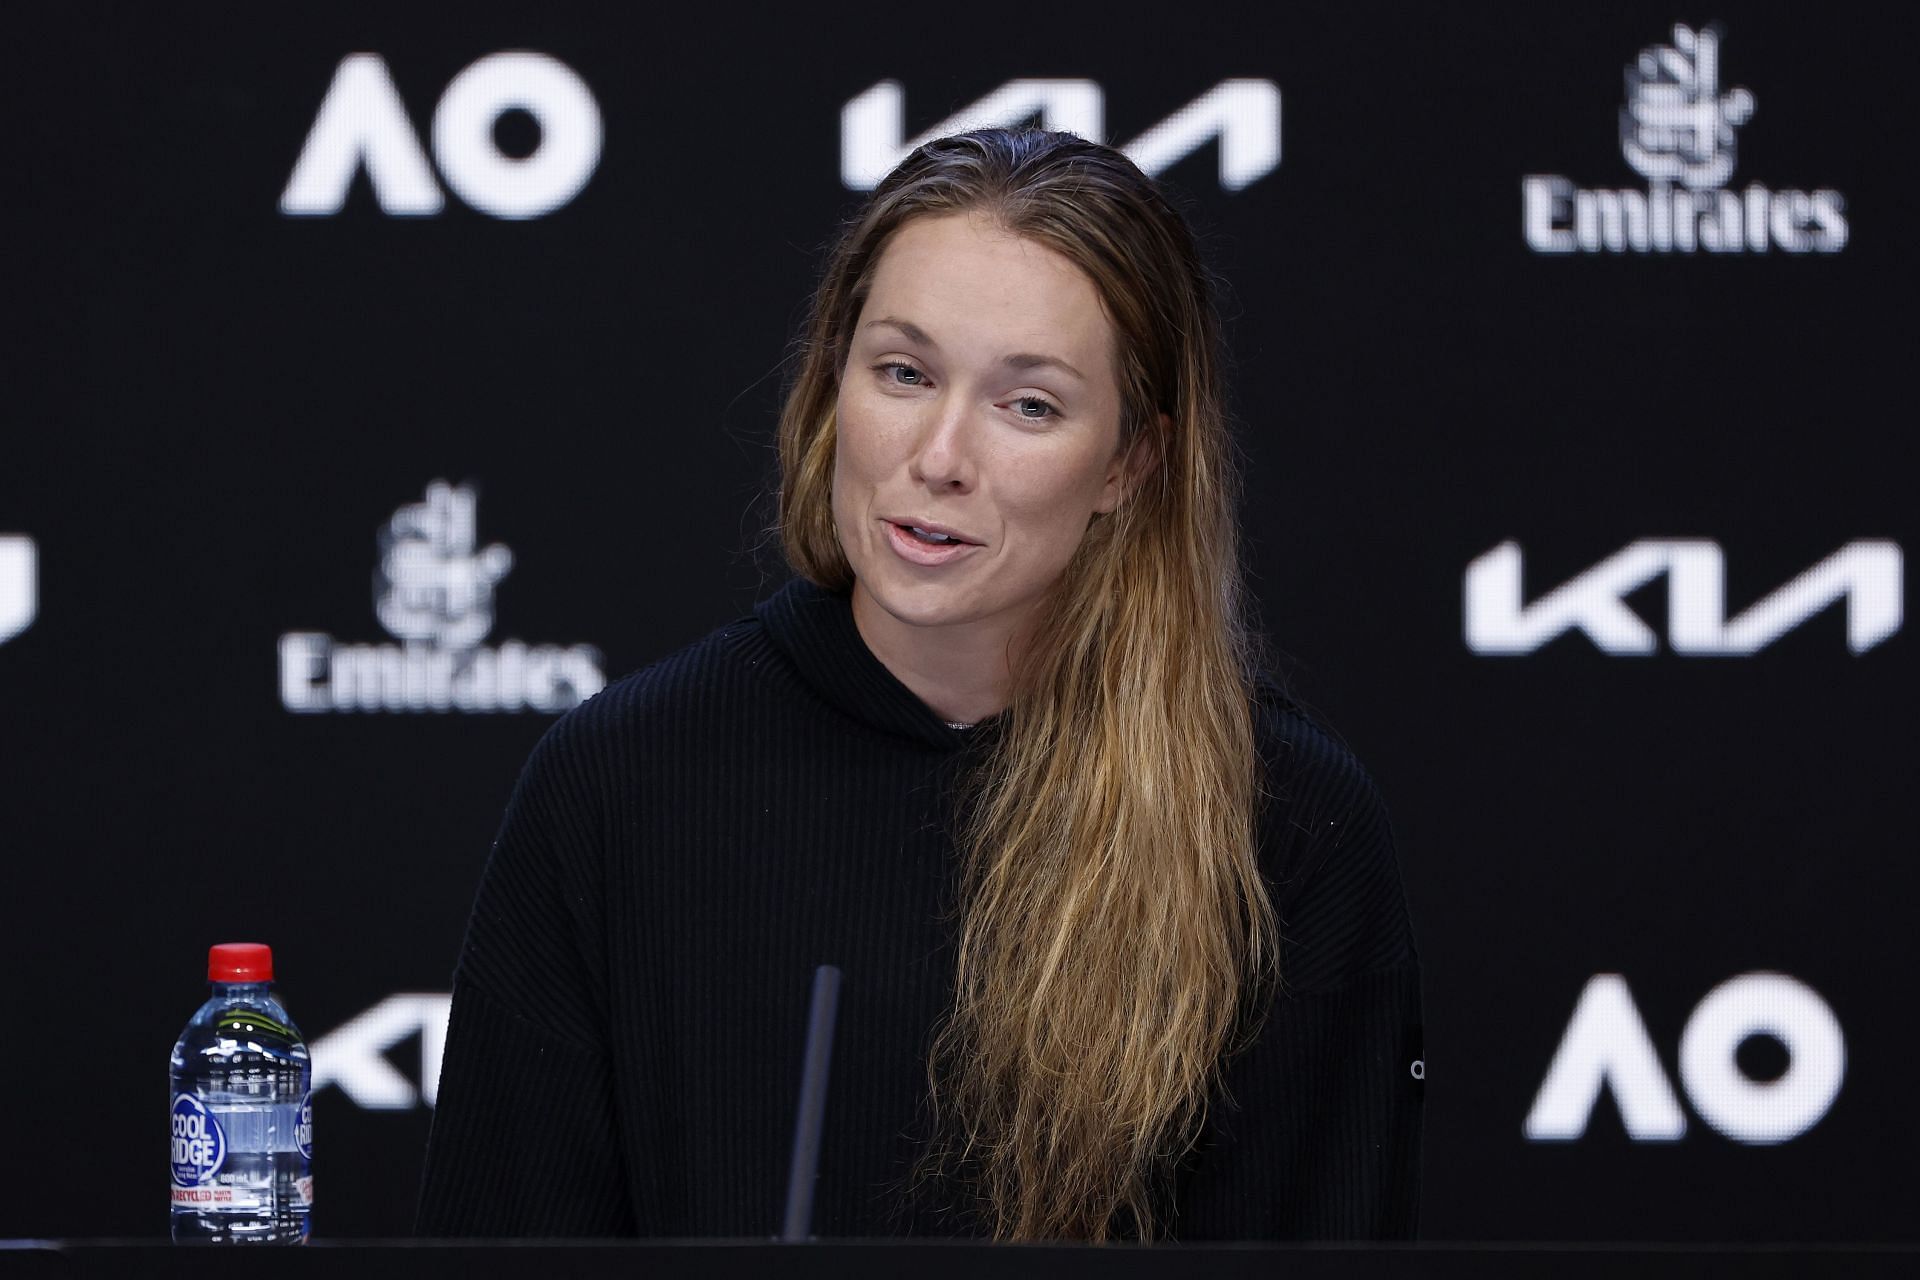 Collins at a press conference after the 2022 Australian Open